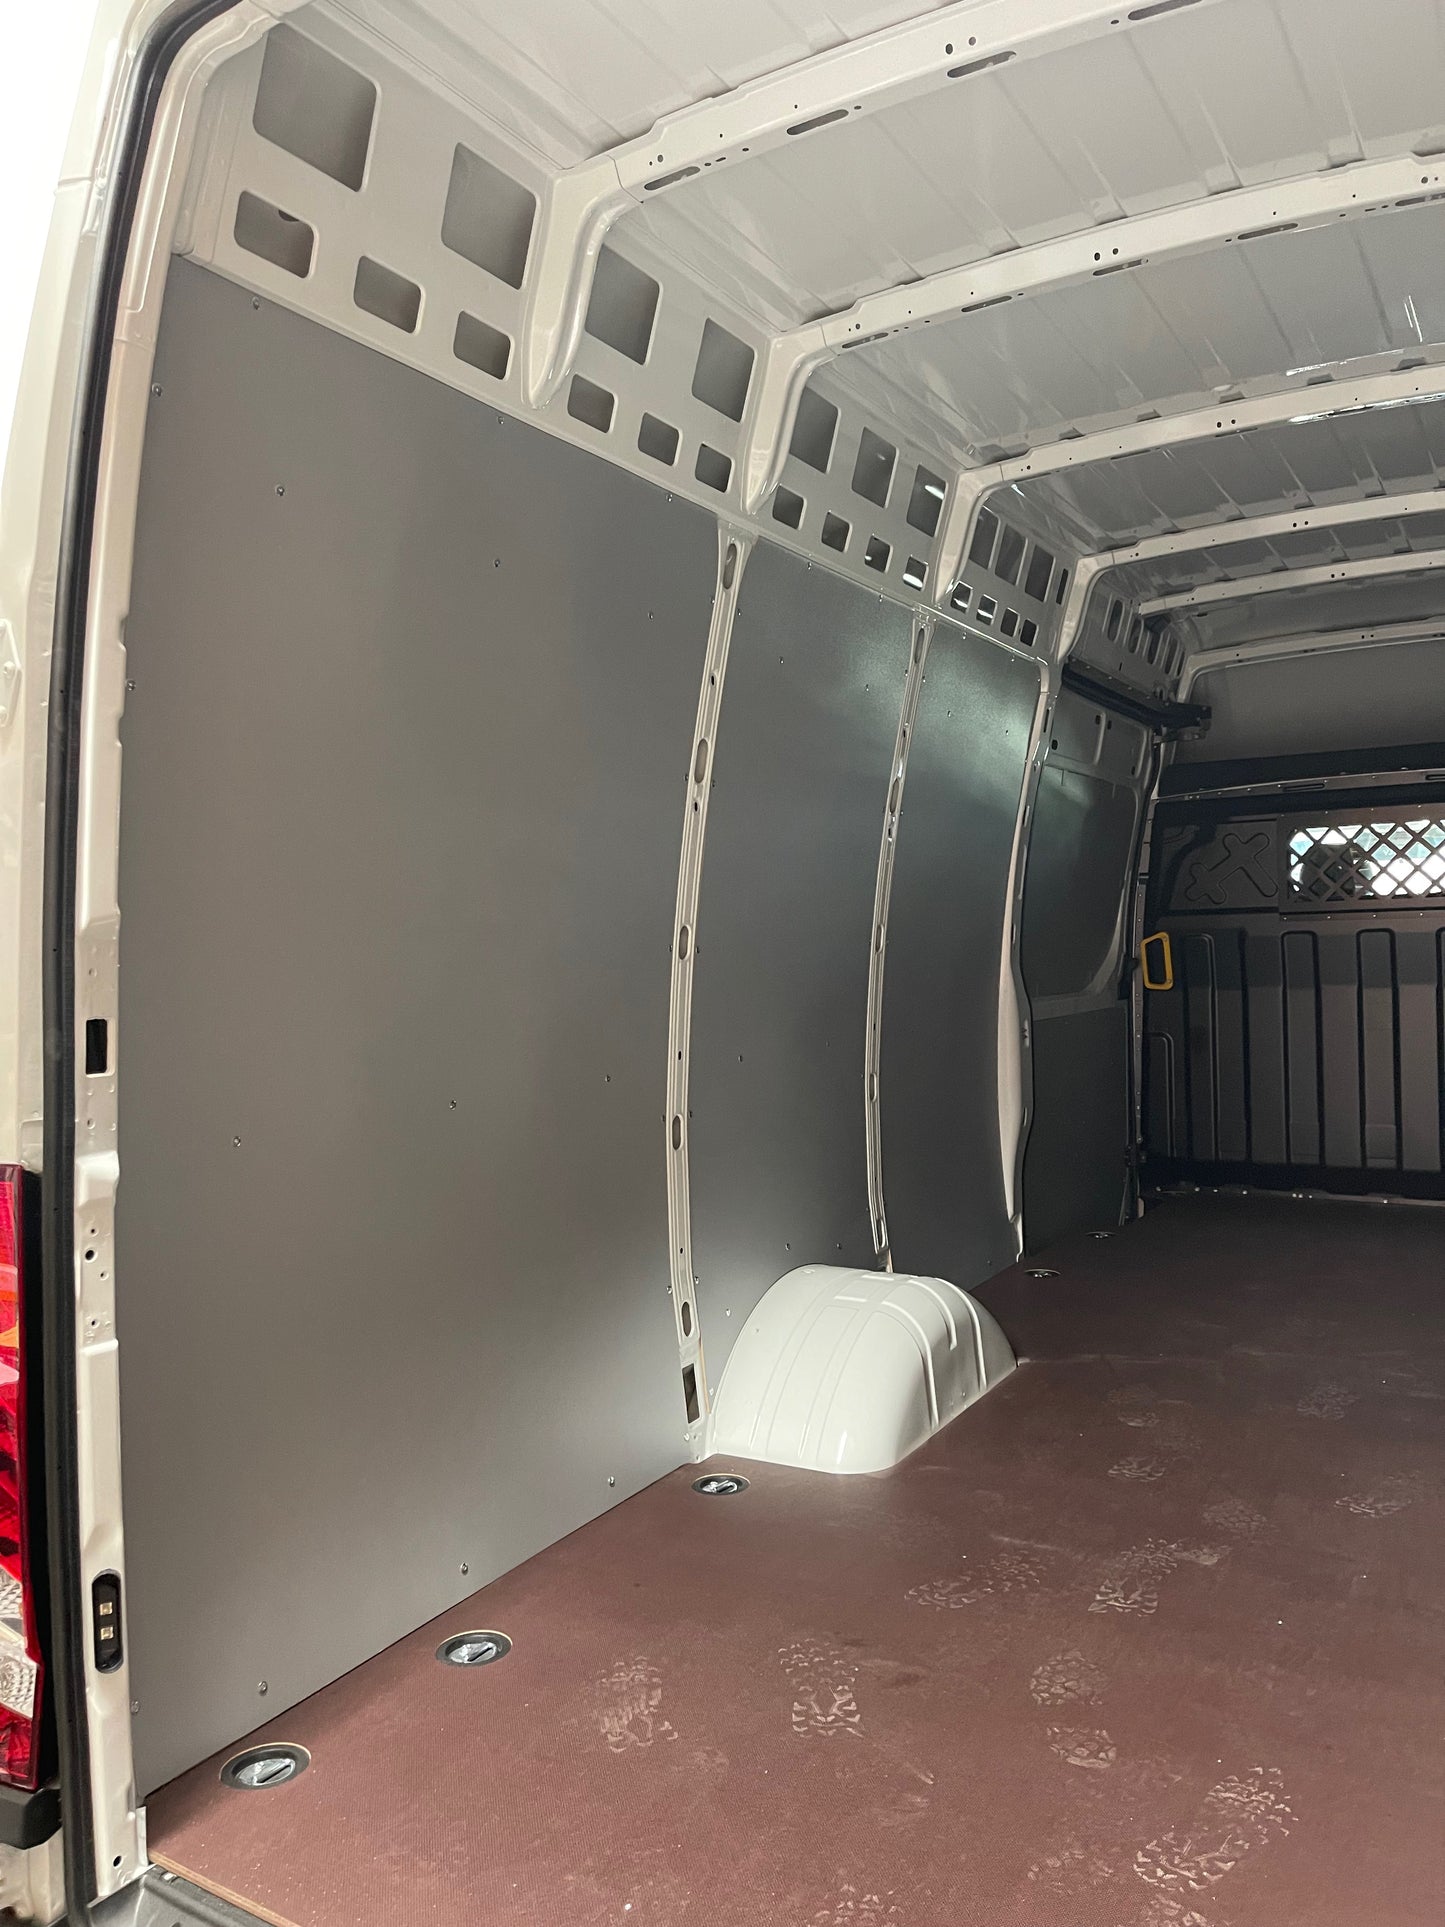 Iveco Daily Wall Panel Kit - Fits single and dual rear wheel vans